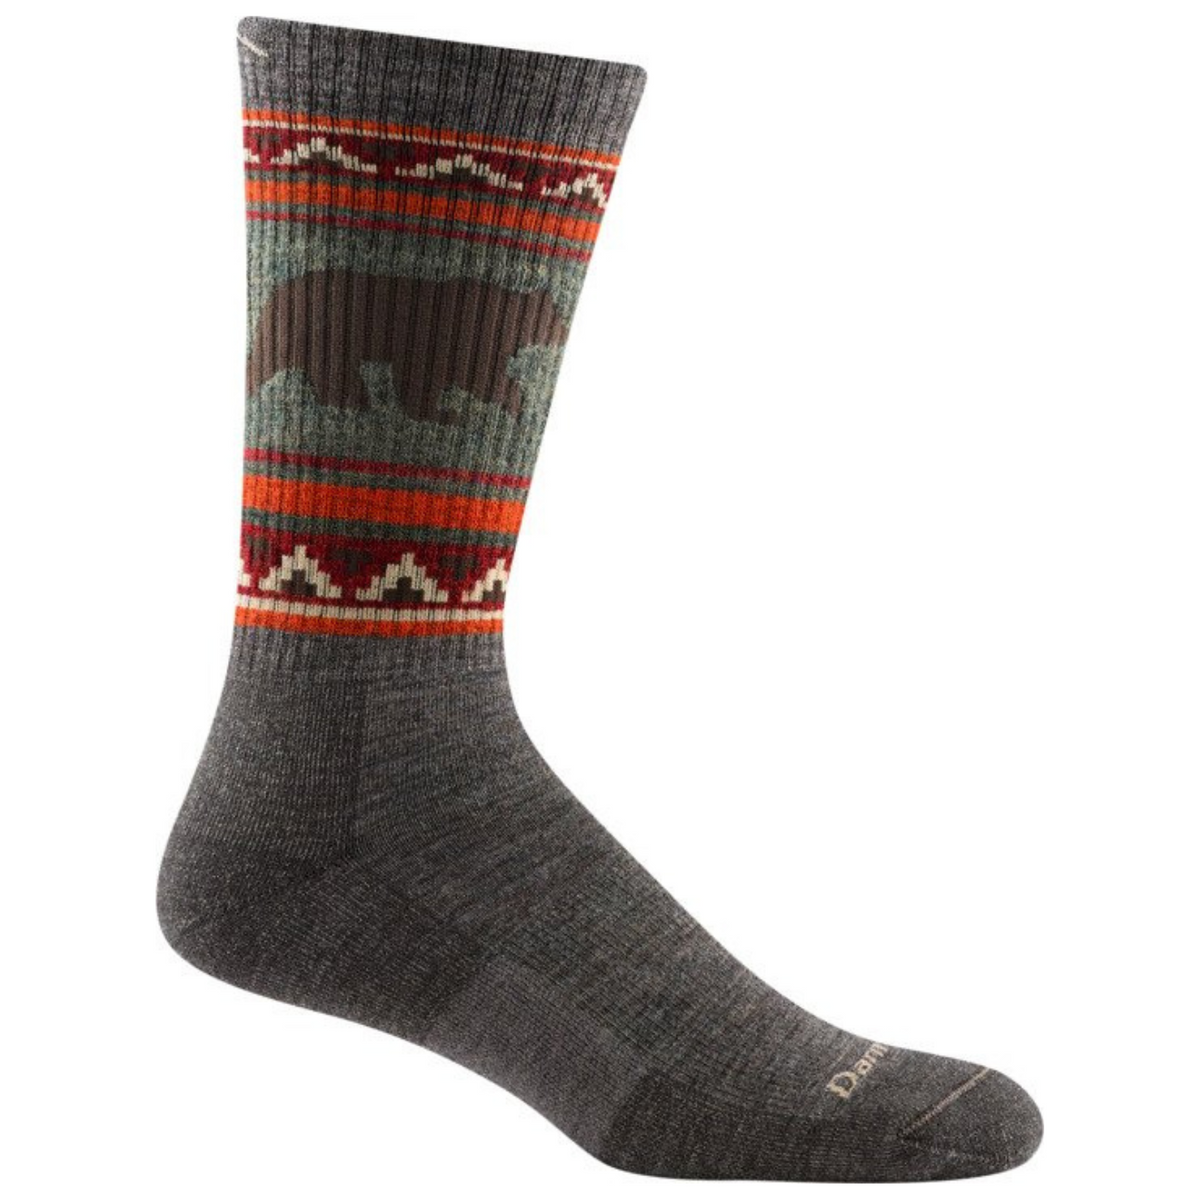 Darn Tough 1980 VanGrizzle Hiker Boot with Full Cushion Midweight Men&#39;s Crew Sock featuring taupe sock with red, orange, and brown pattern around ankle with brown bear. Sock shown on display foot. 